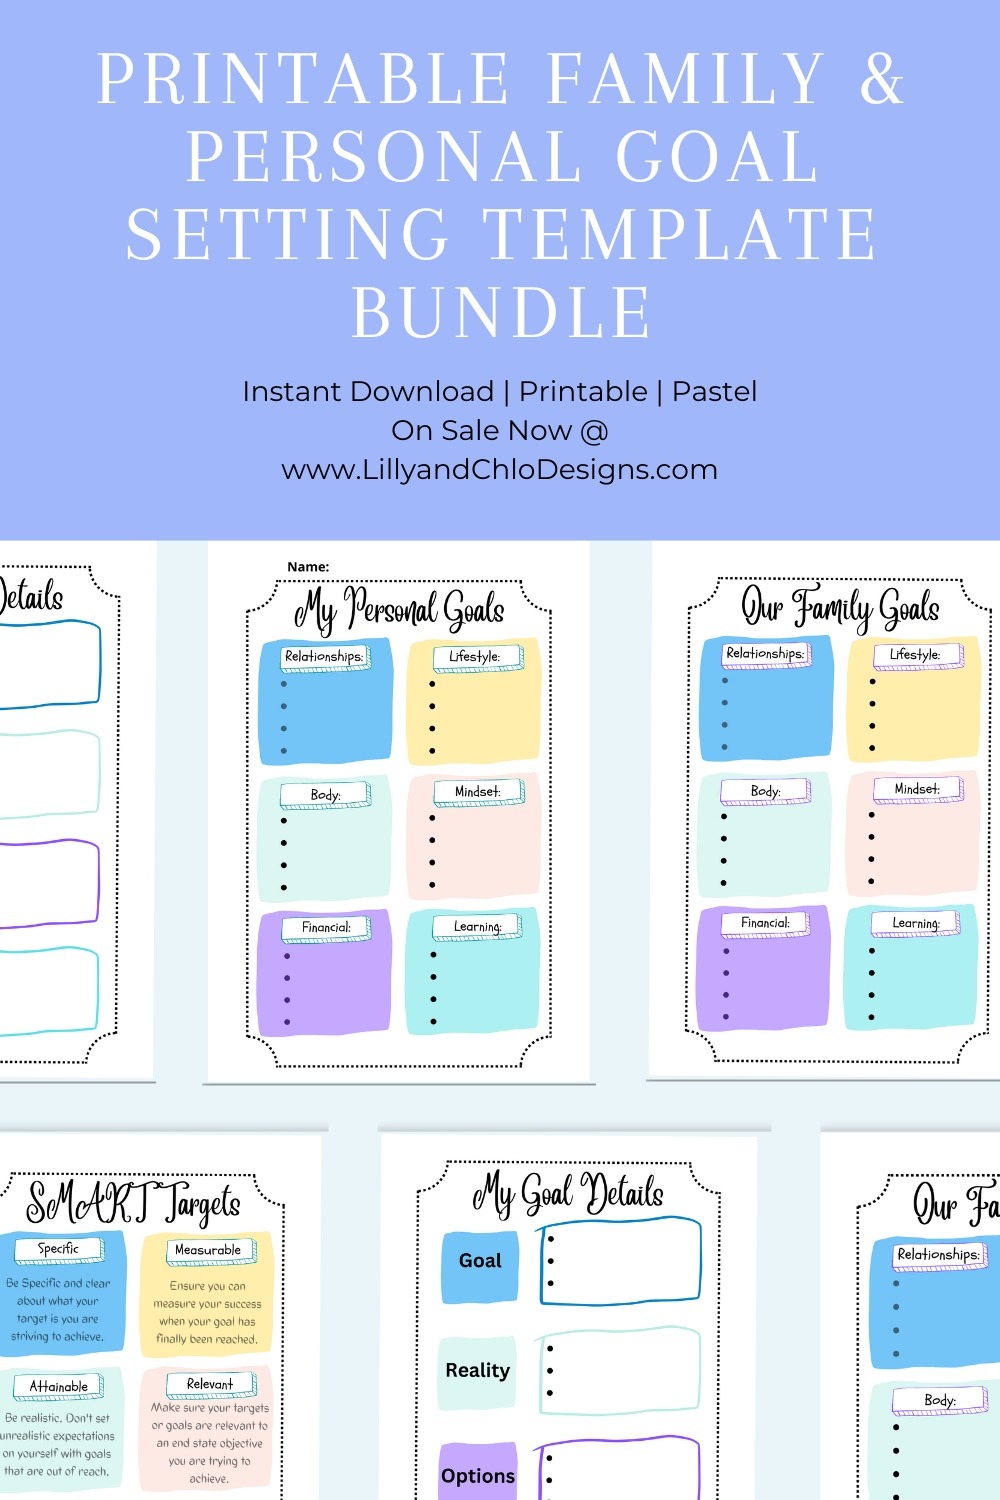 Printable family and personal goal setting template bundle, instant download, printable, pastel, on sale now. Snap shots of the our family and my personal goal setting worksheets, SMART targets guidance notes and My goal details using the GROW model.